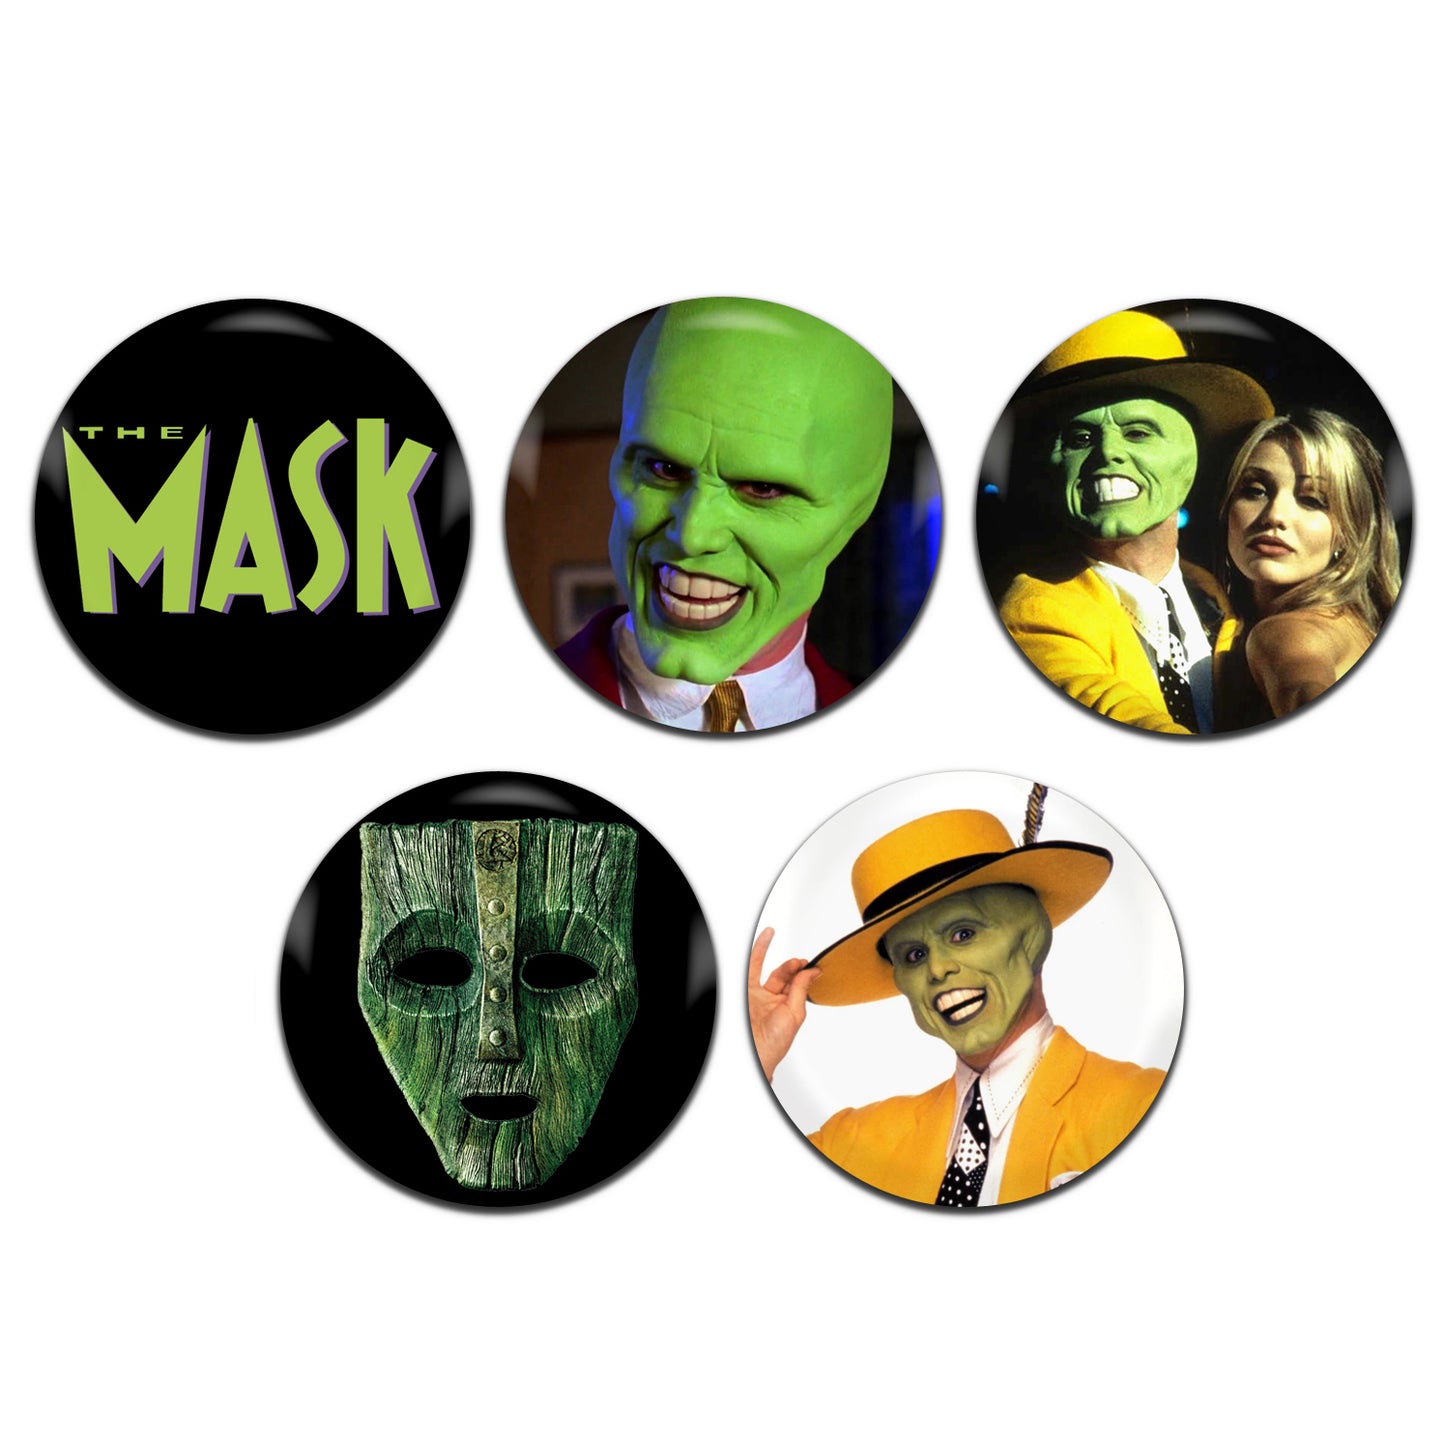 The Mask Movie Superhero Comedy Film 90's 25mm / 1 Inch D-Pin Button Badges (5x Set)